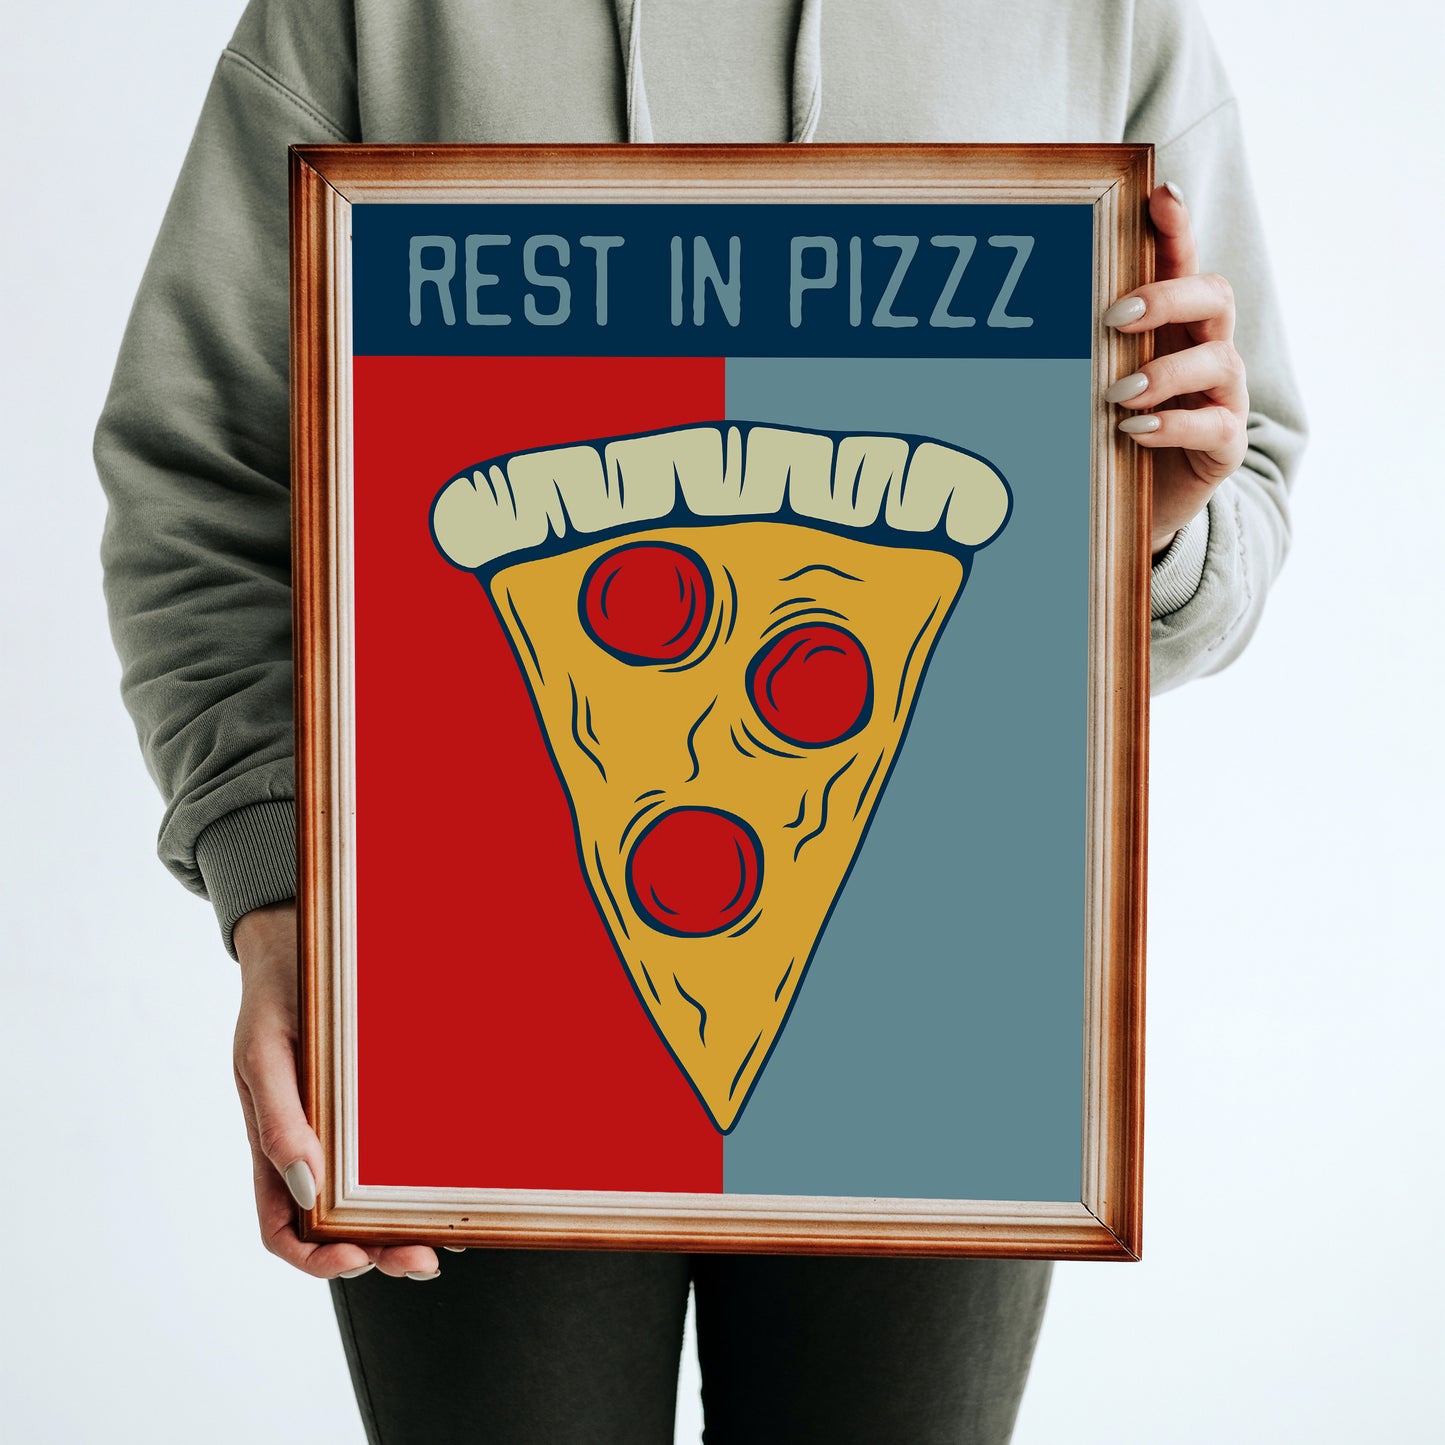 Rest in Pizzz Poster